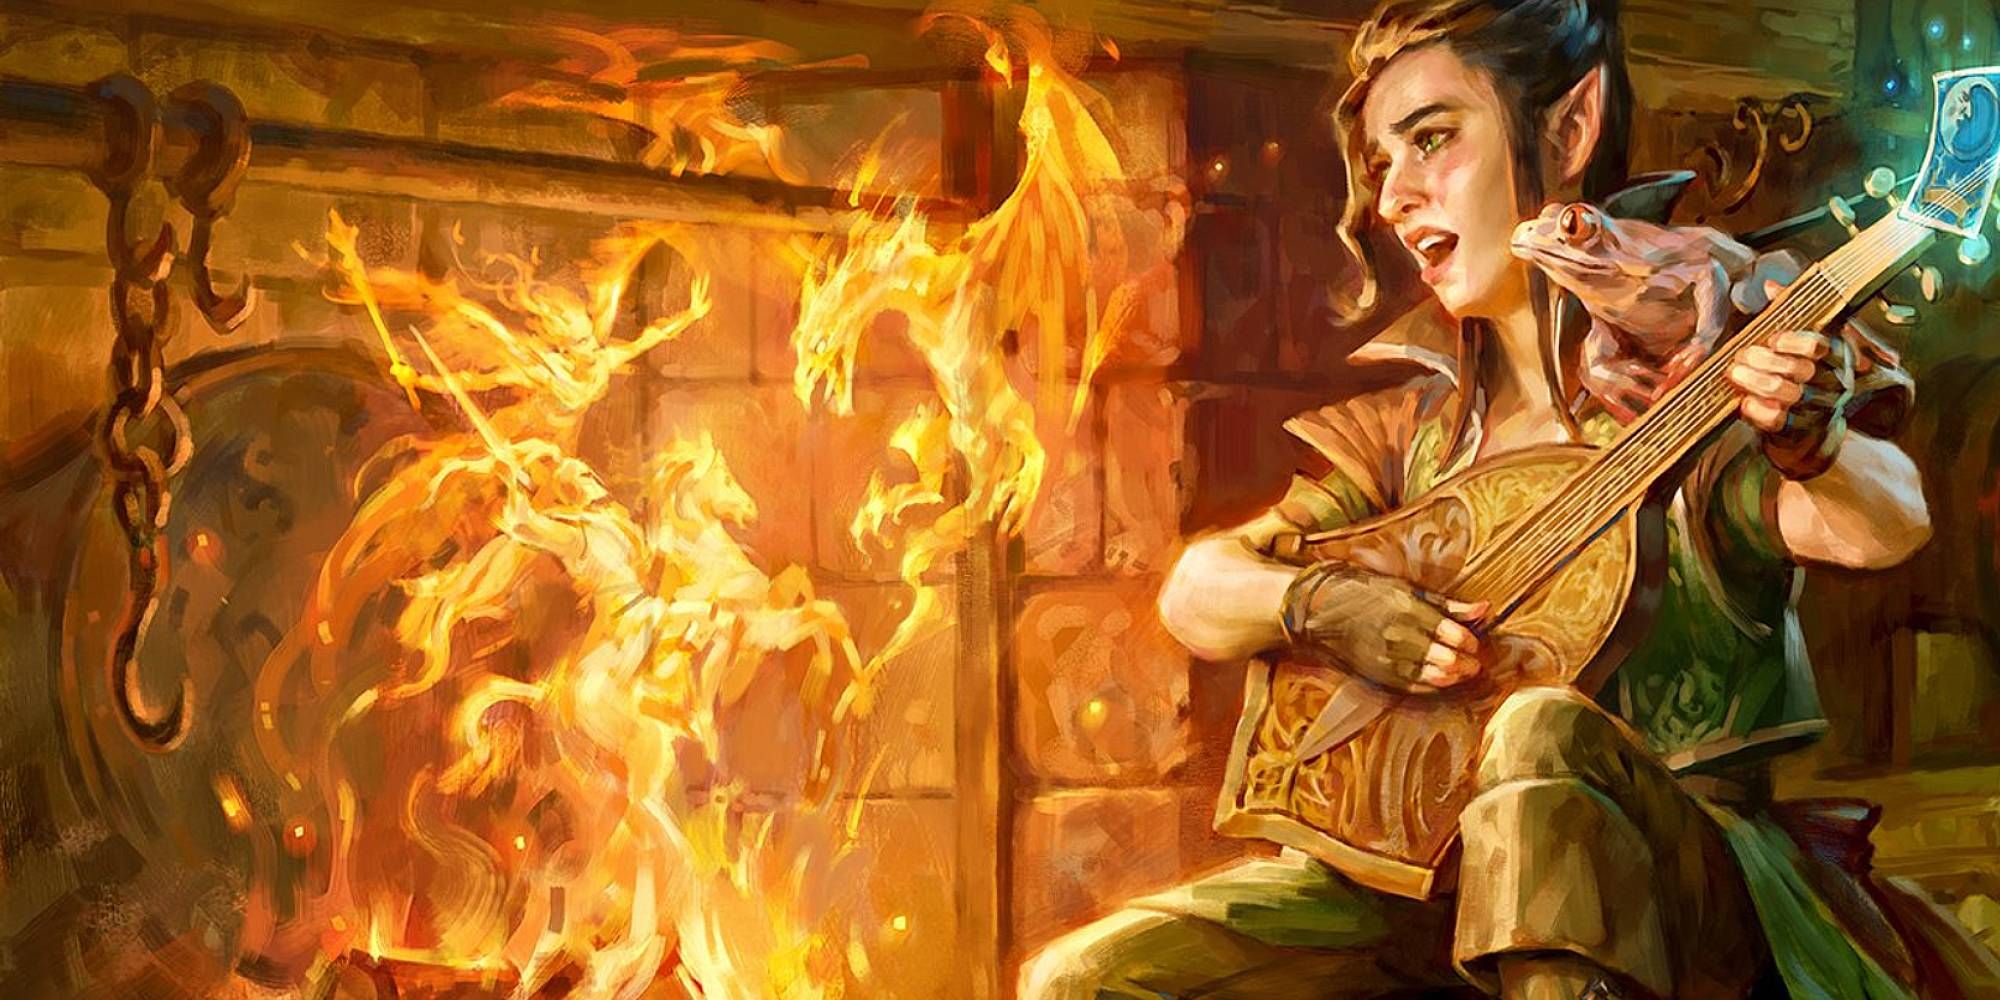 A Halfling plays a magical lute which alters a nearby fire to show a knight facing a dragon